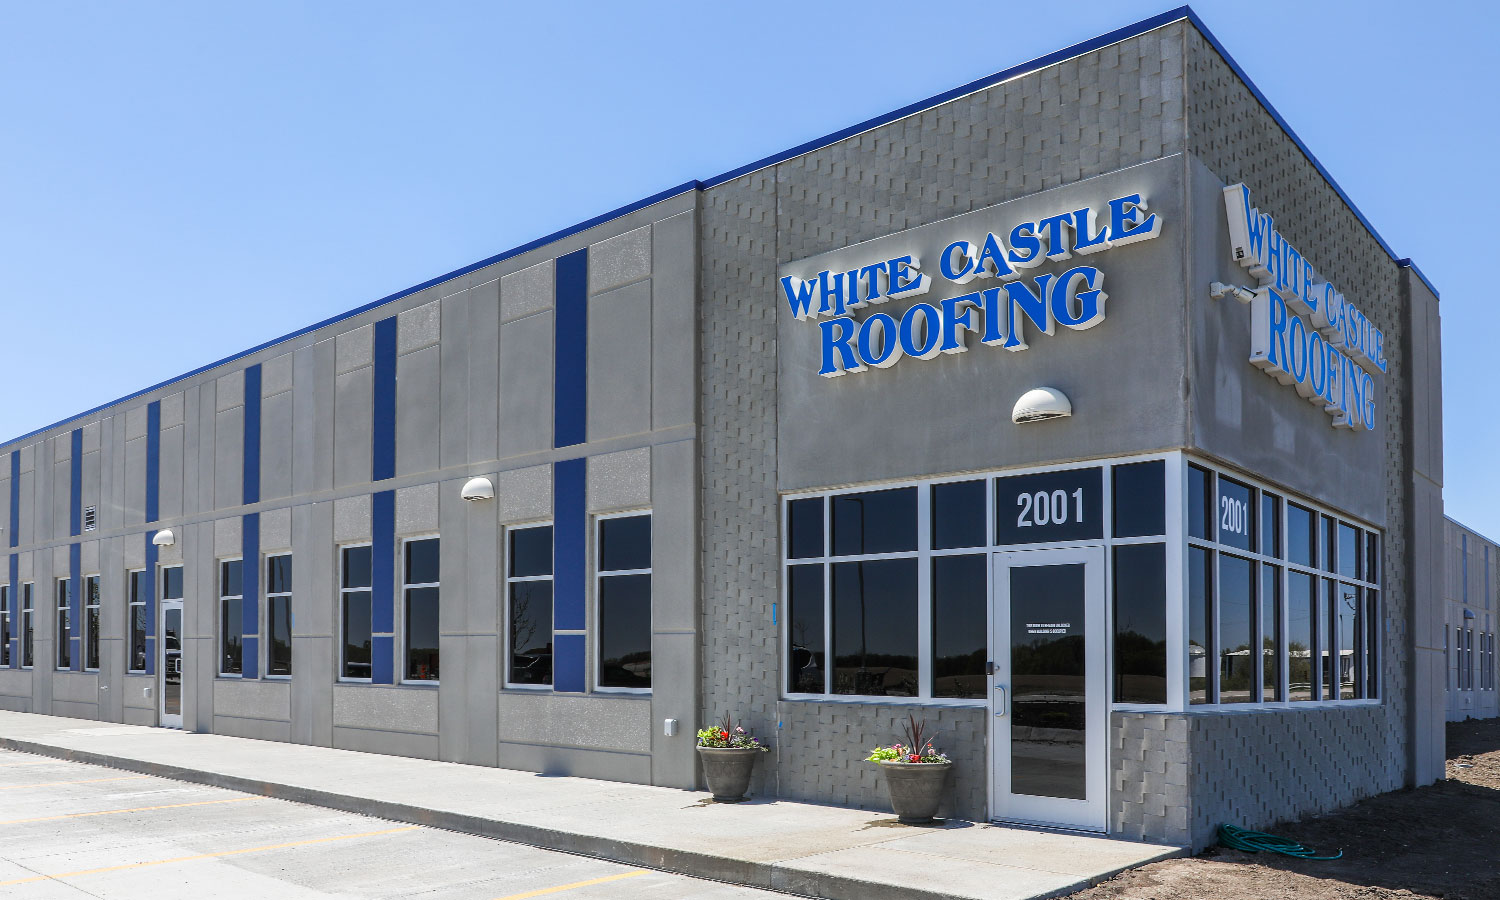 White Castle Roofing - Lincoln Headquarters